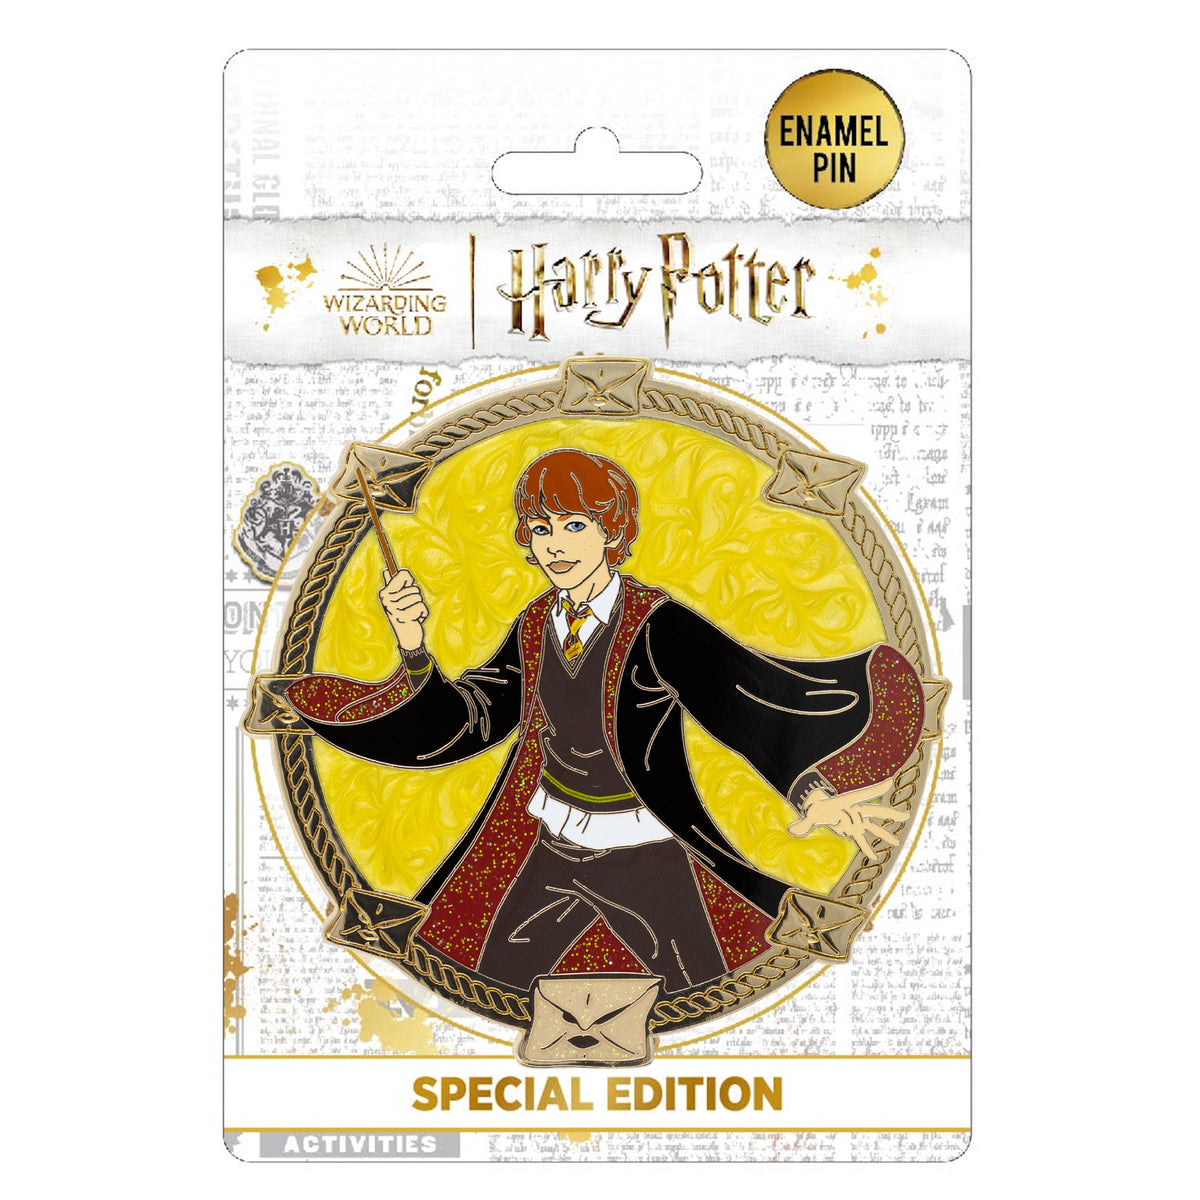 Harry Potter Iconic Series - Complete Series of 6 Pins 3&quot; Limited Edition 300 -